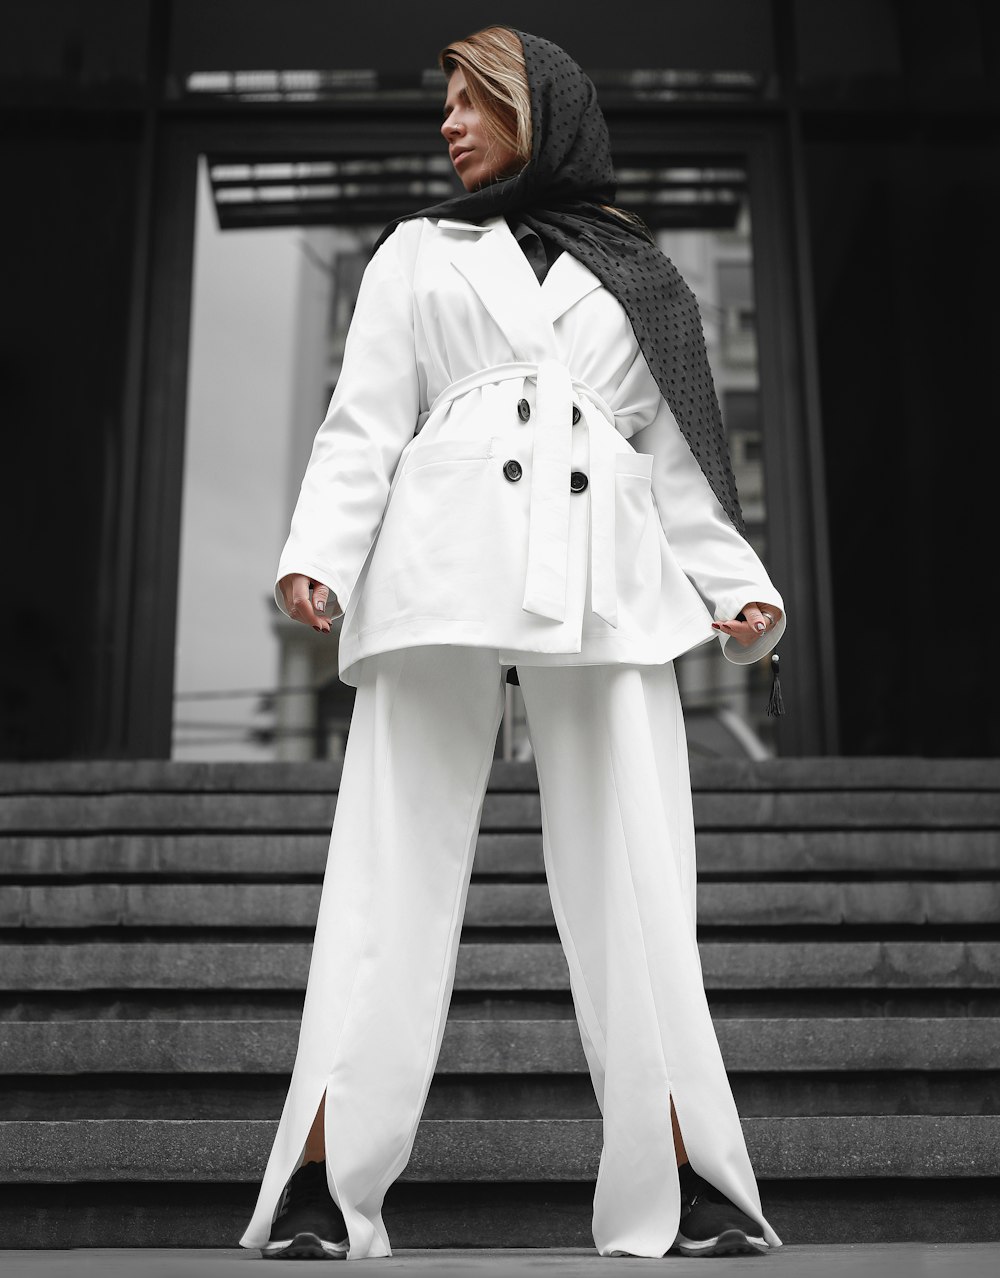 woman in white coat and pants standing on stairs